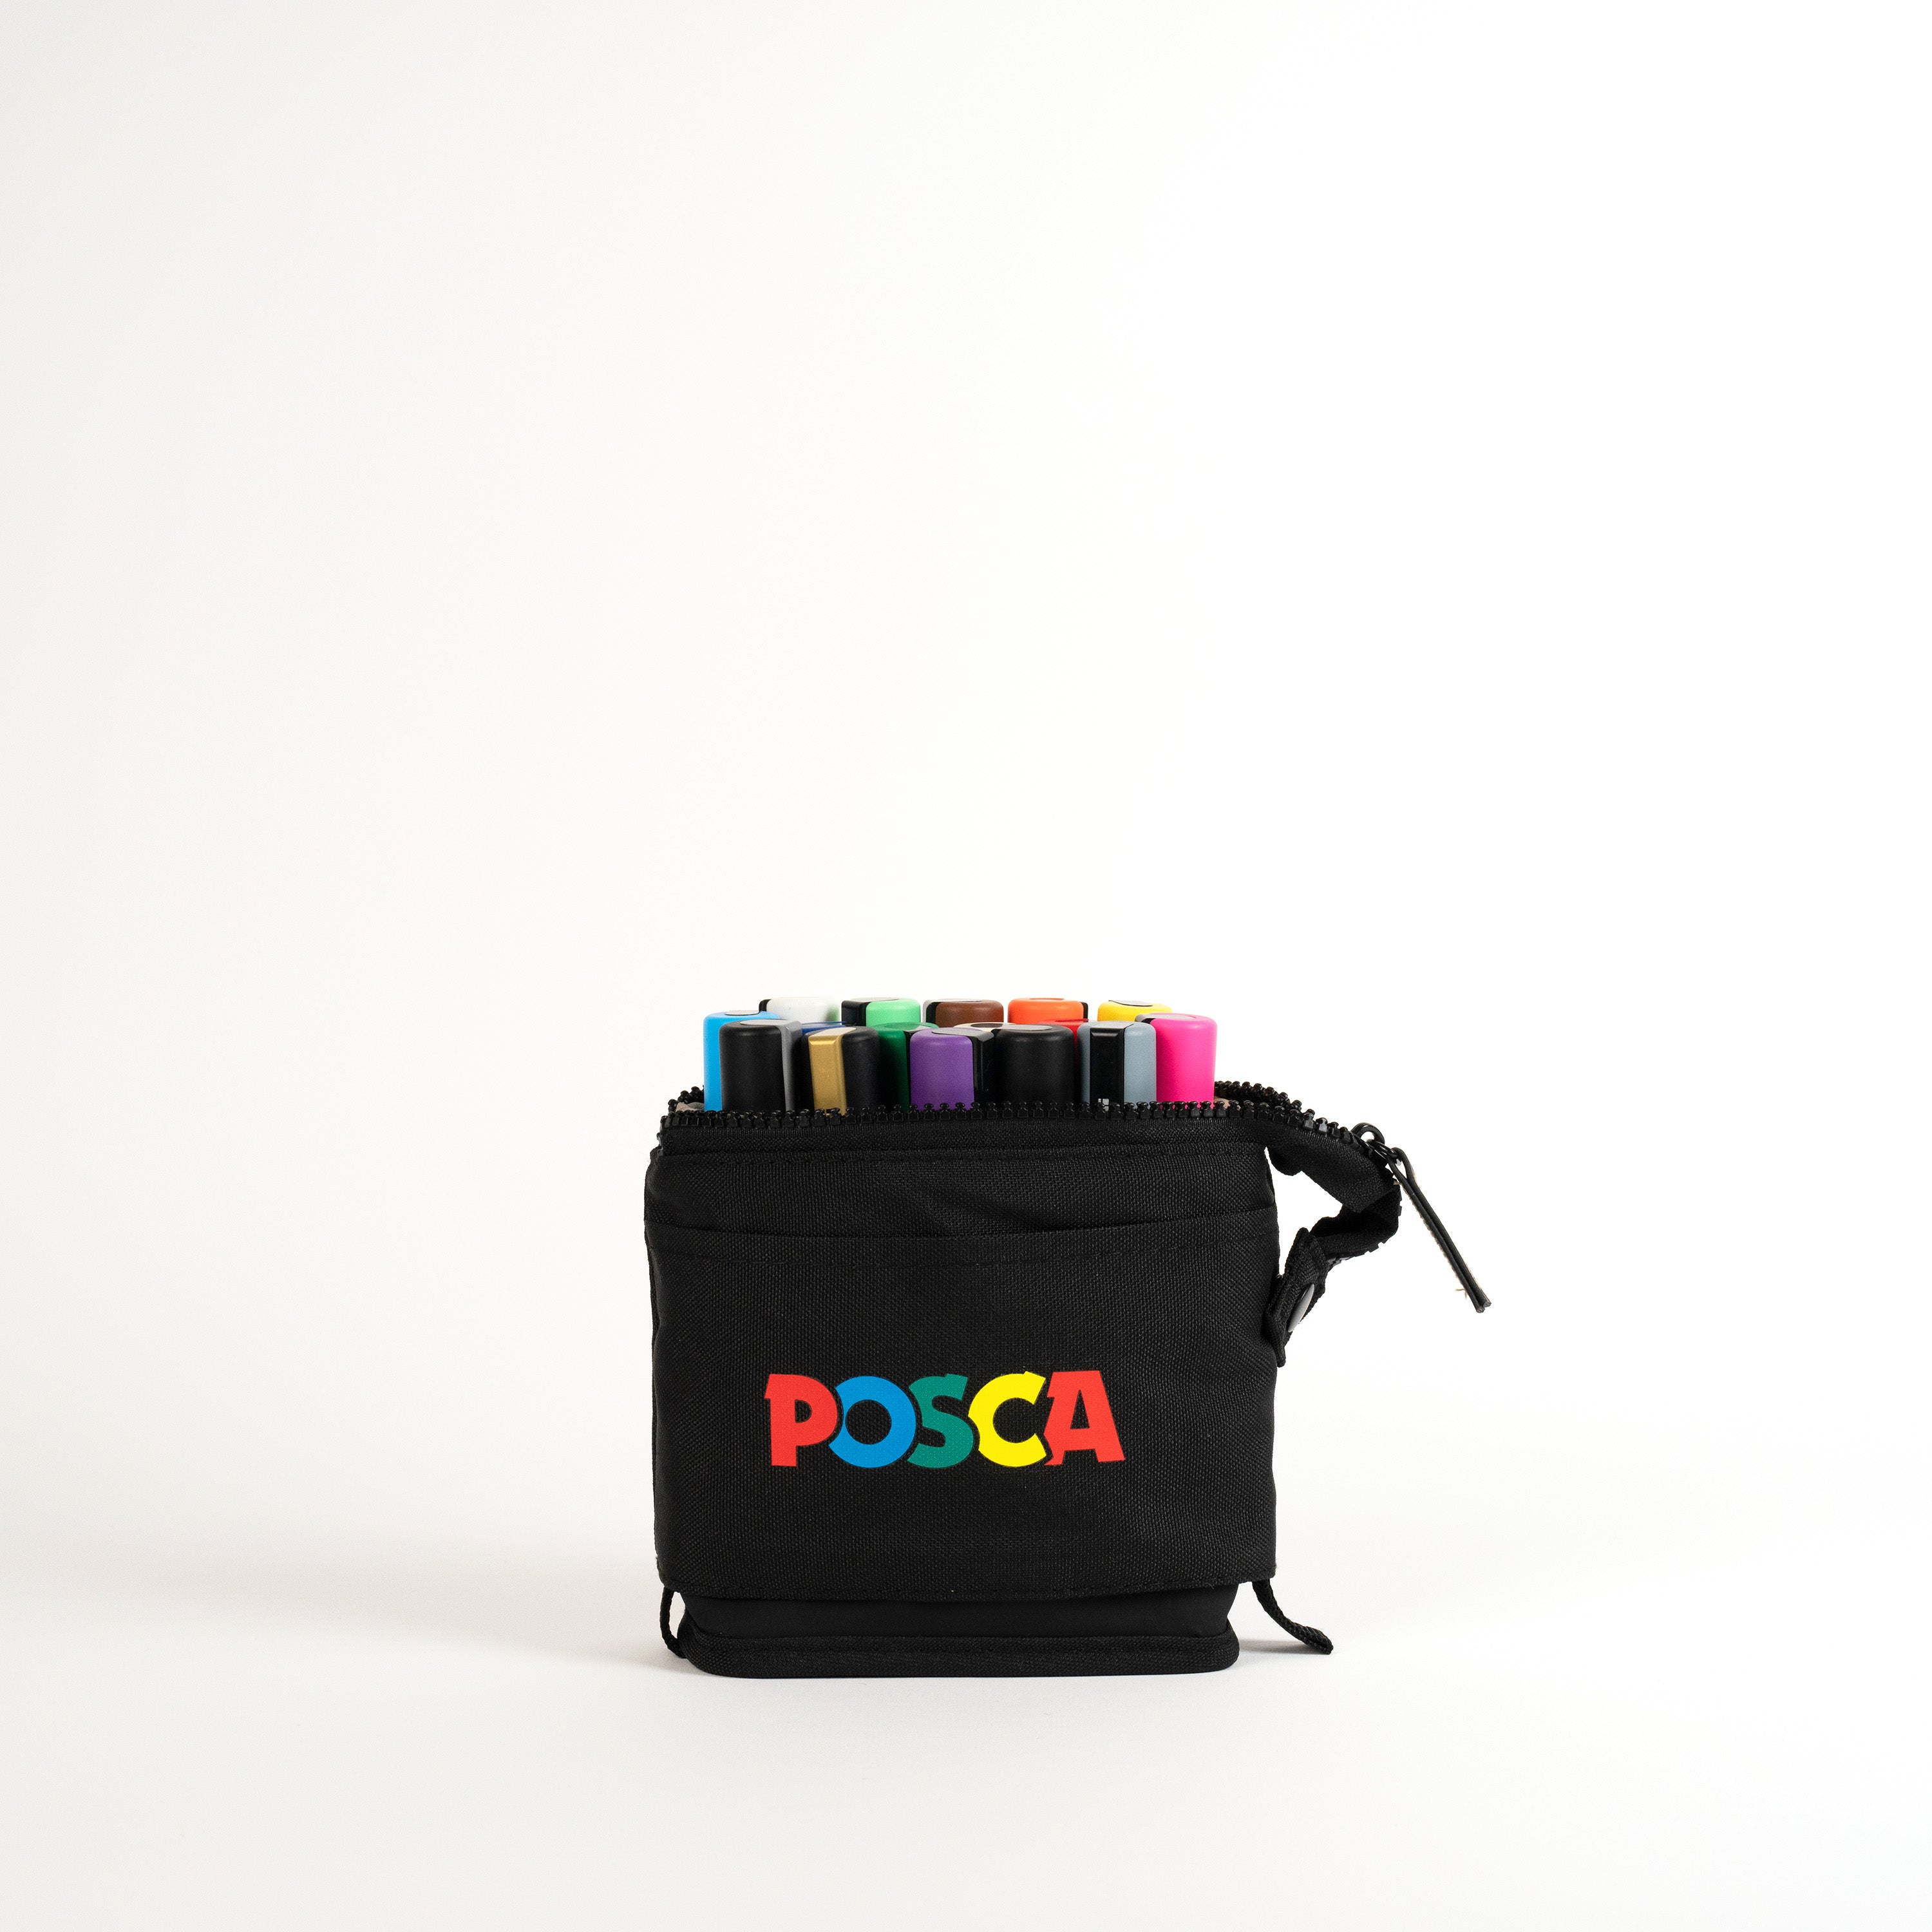 Posca Paint Pen Set - Rainbow PC-5M – Of Aspen Curated Gifts